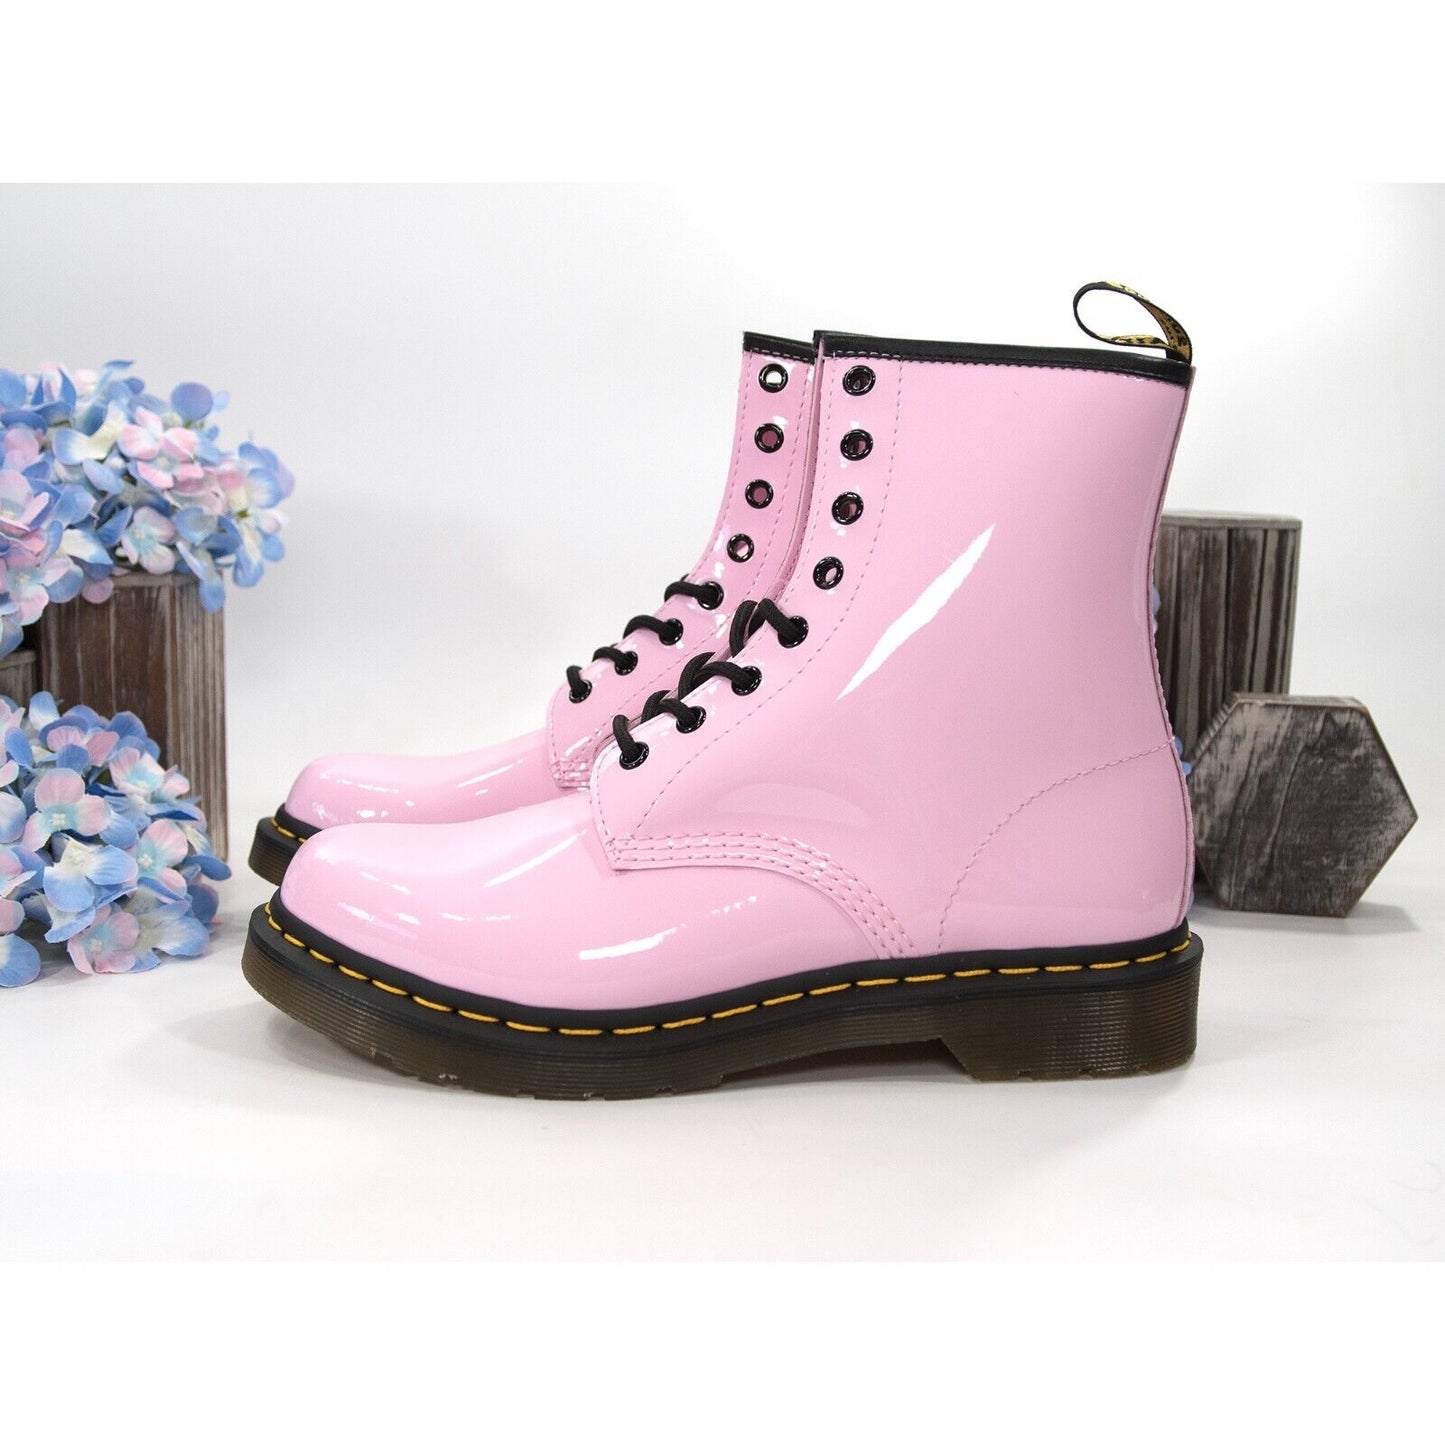 Dr. Martens 1460 Pink Patent Leather Lamper Lace Up Boots Size 10 NIB